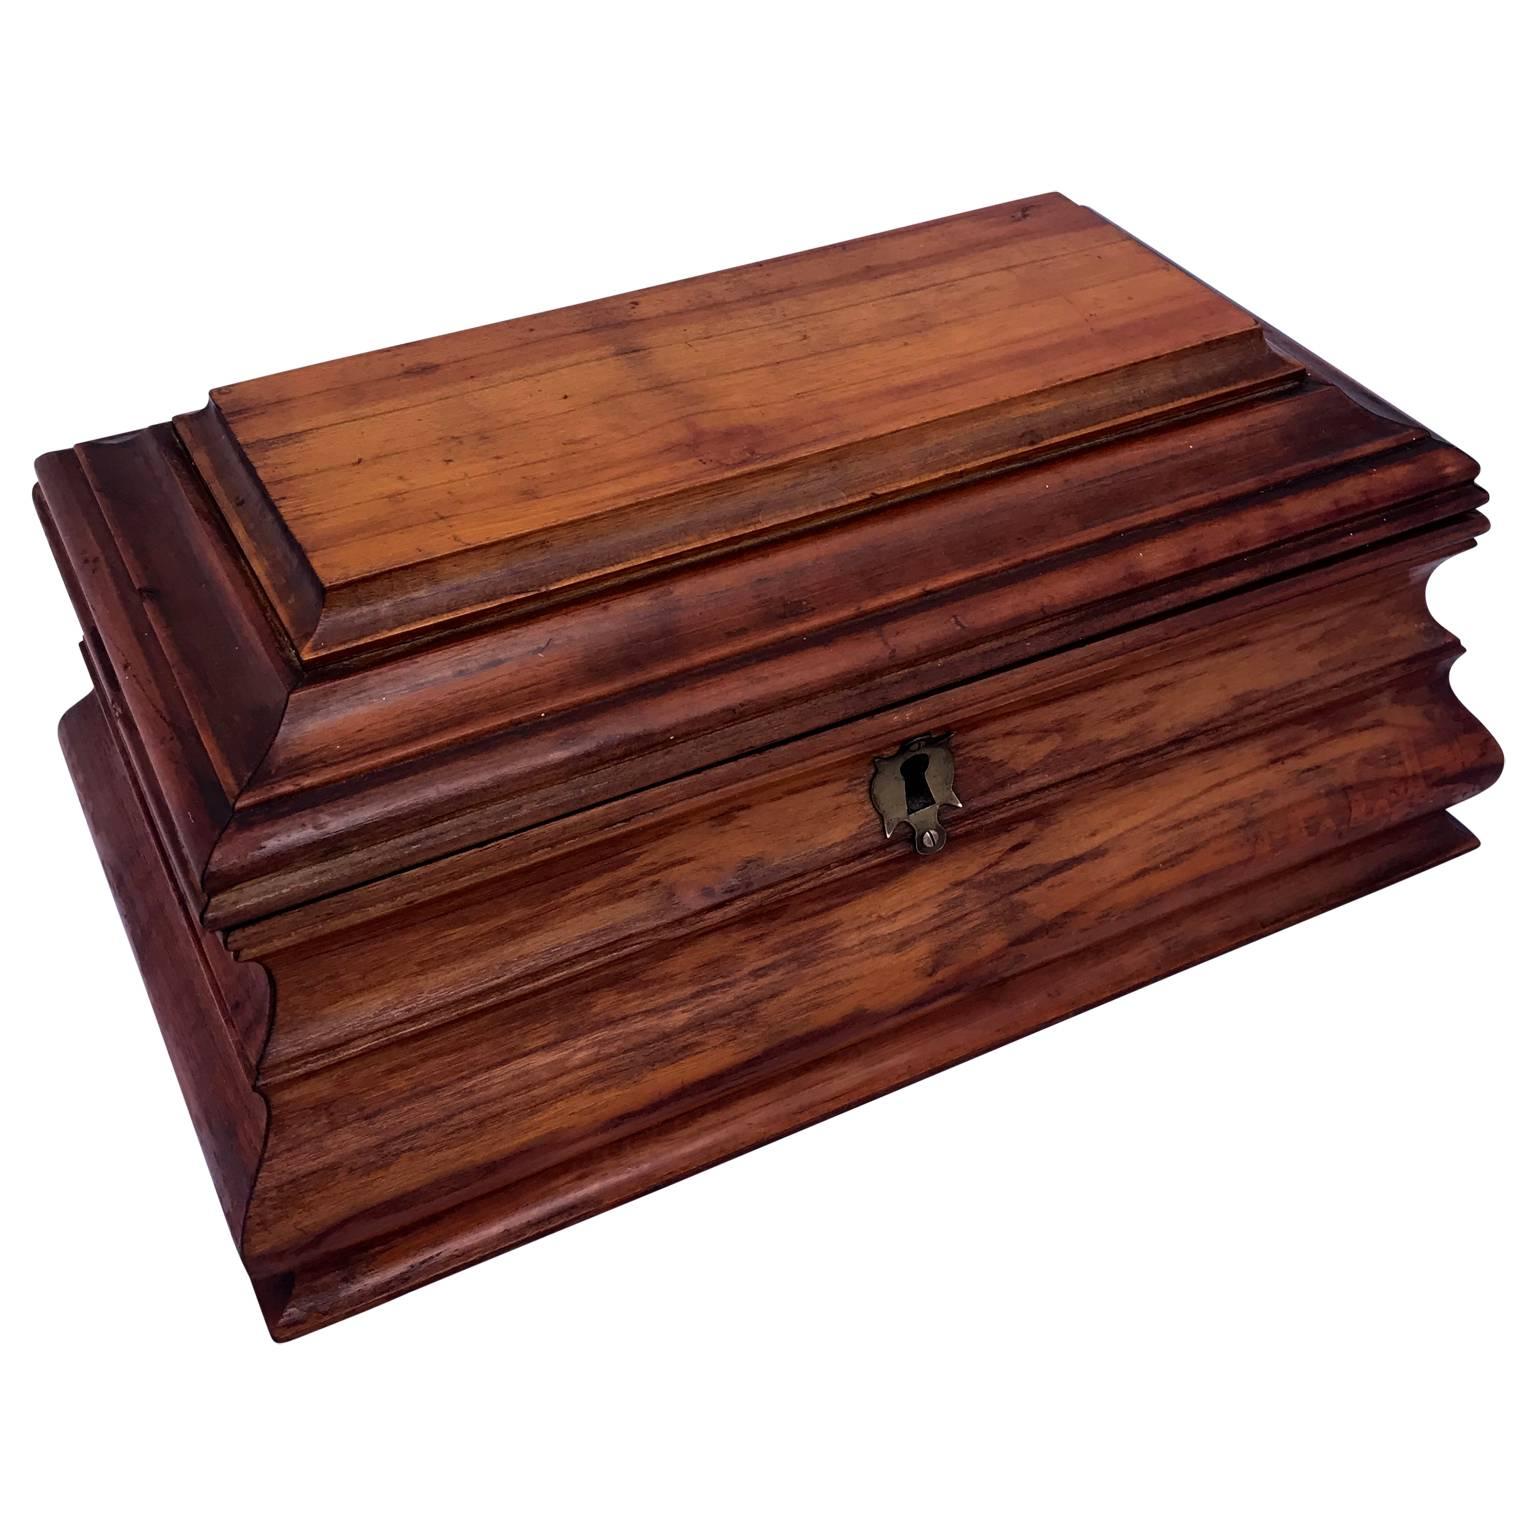 Italian Baroque style jewelry box of fruitwood and original green and white paper on the inside.